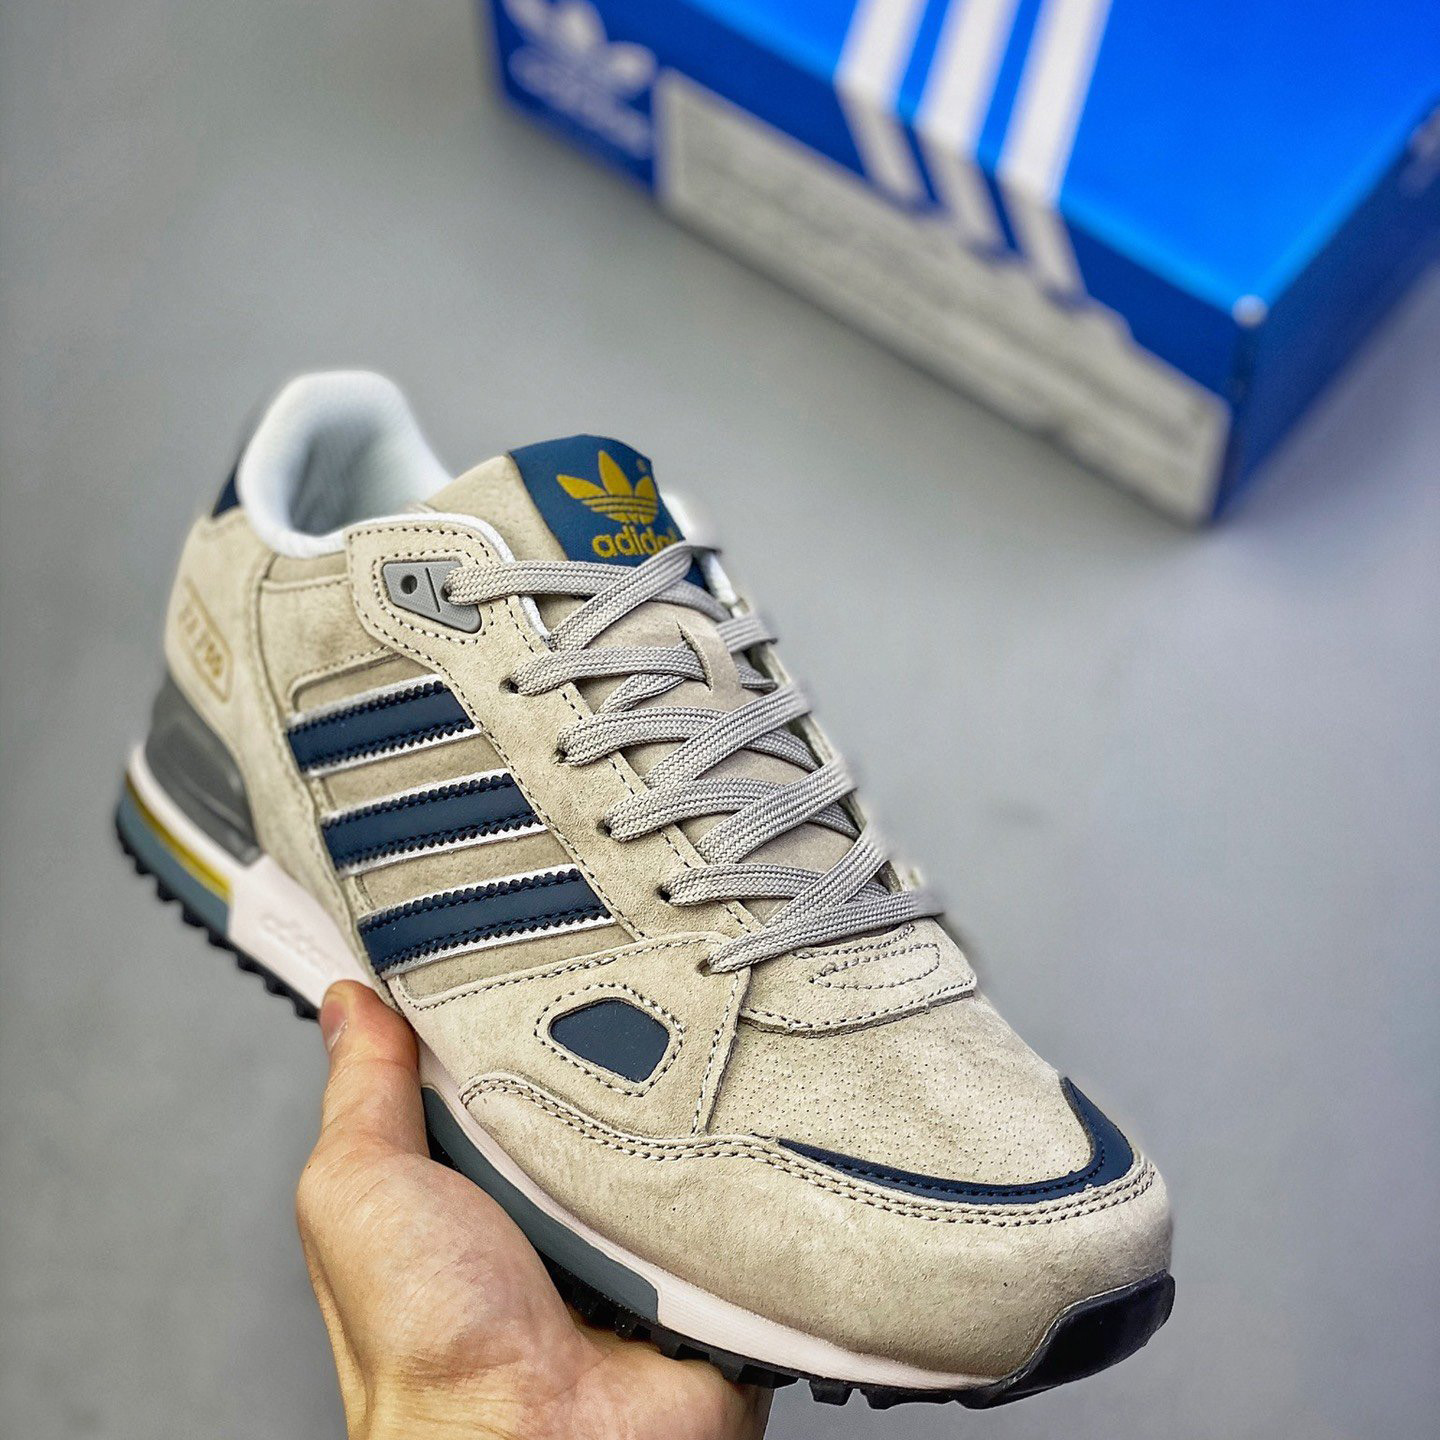 adidas zx 750 lovers